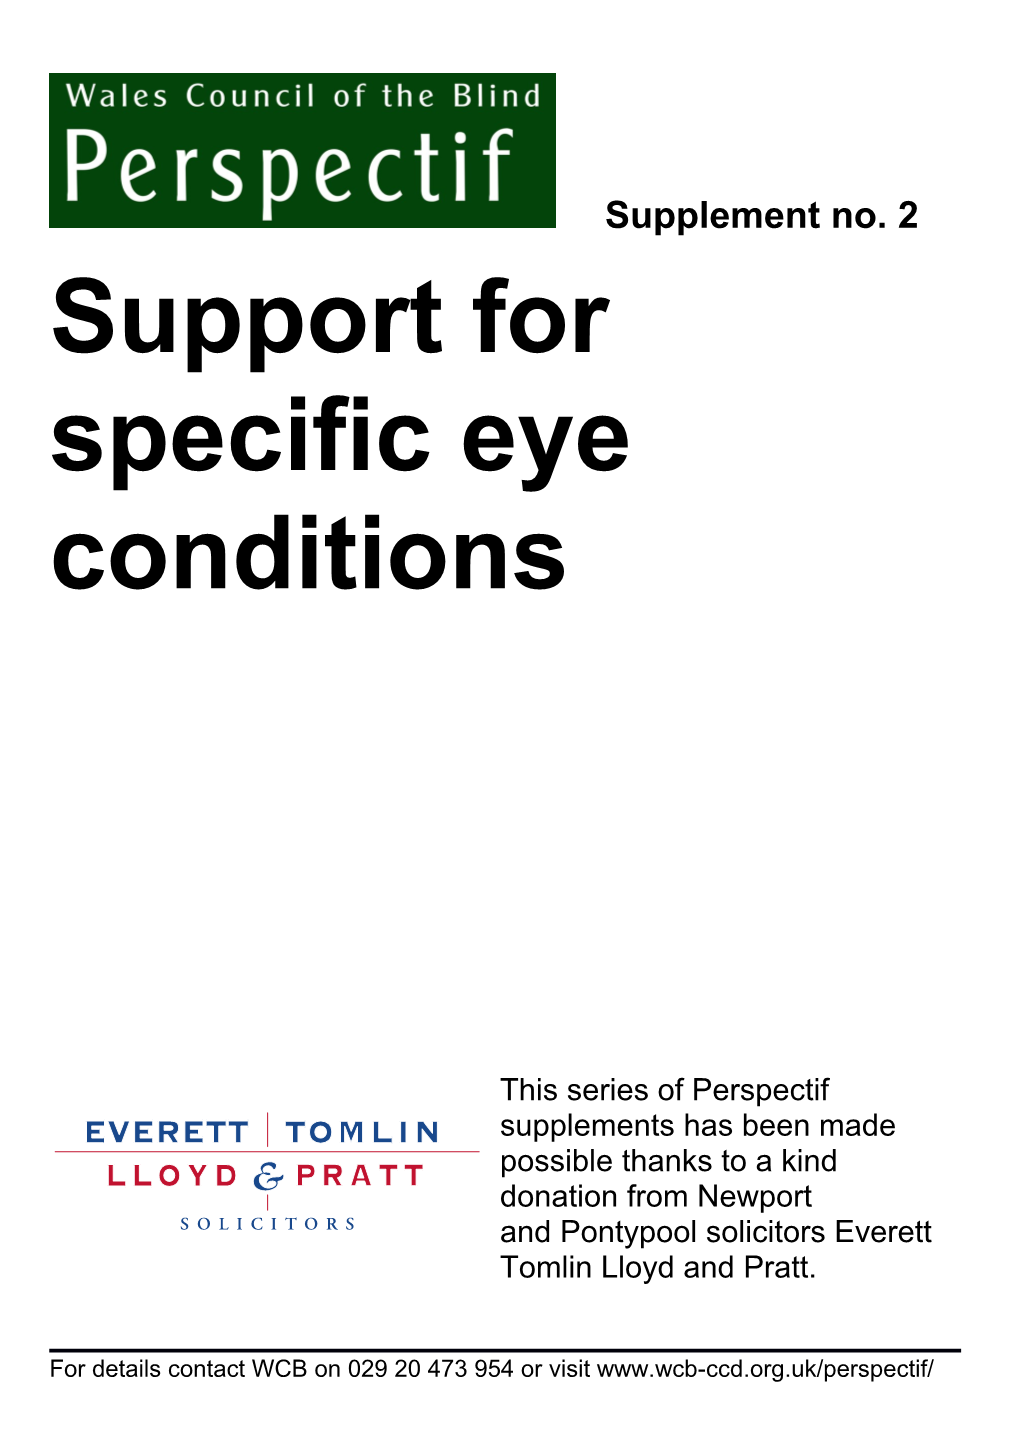 Support for Specific Eye Conditions